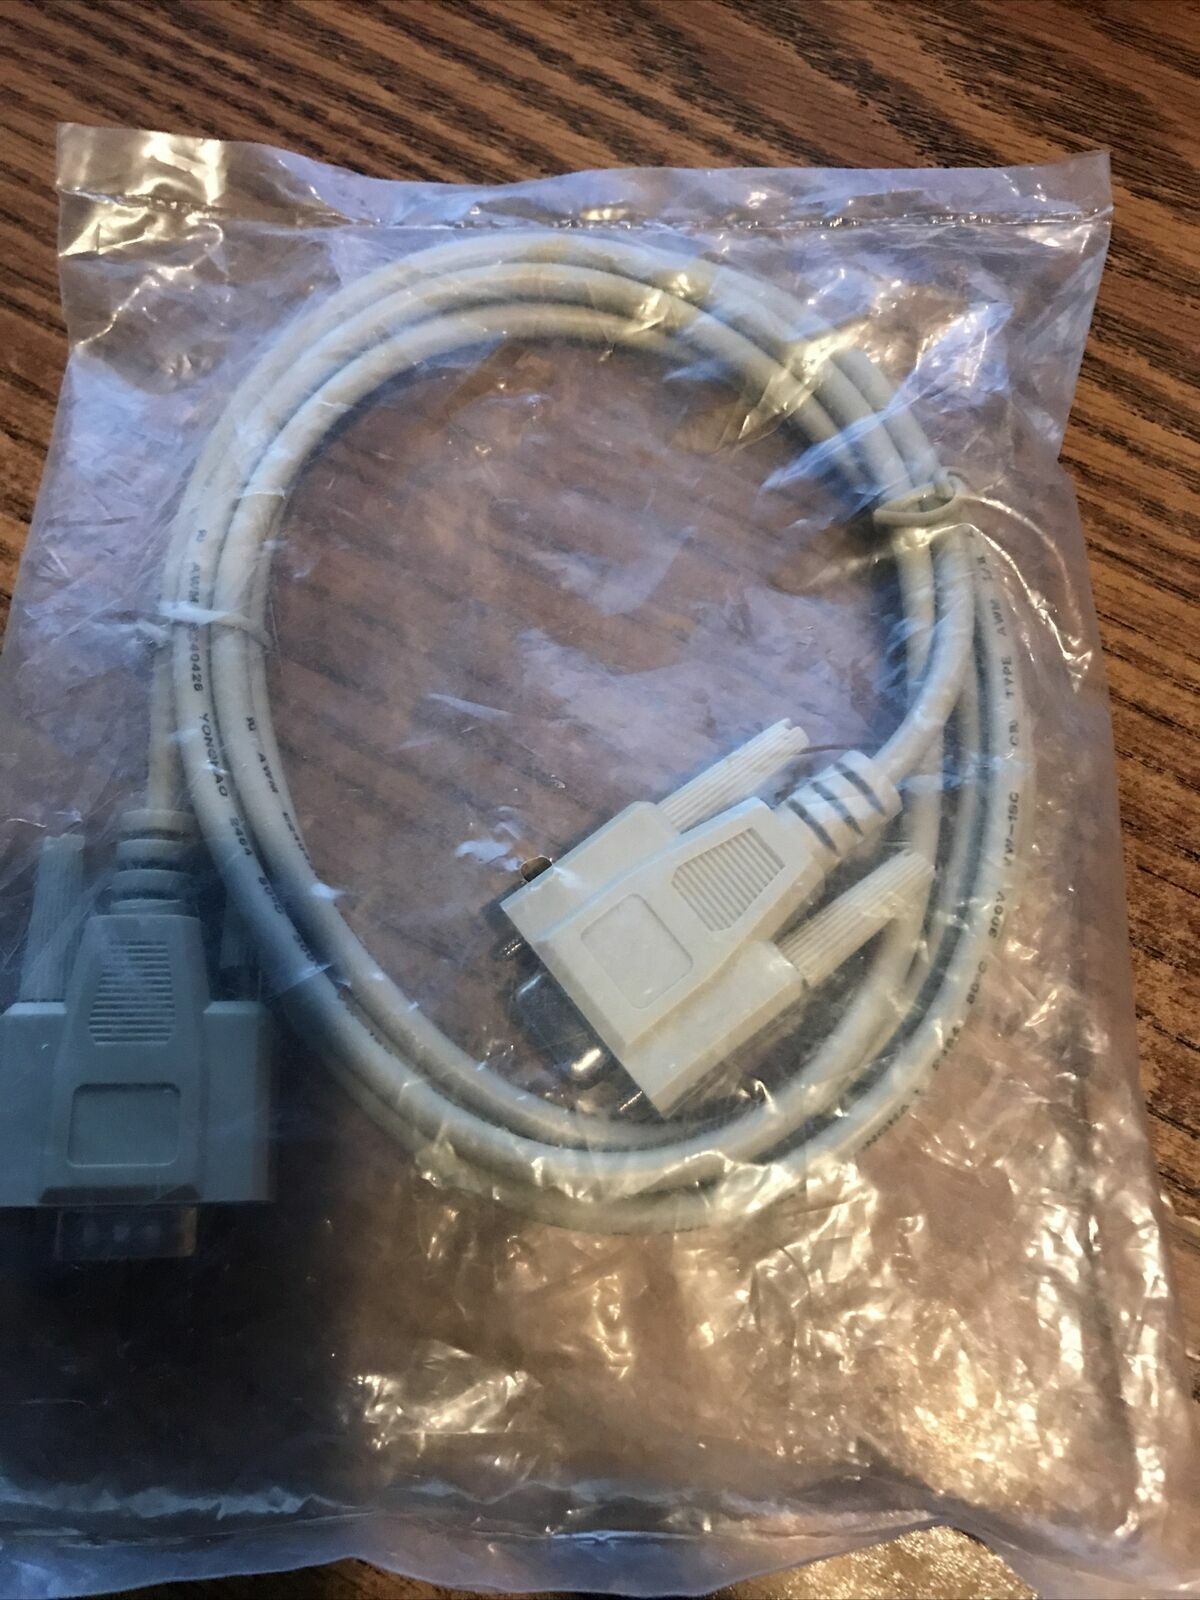 6ft Serial NULL-MODEM  DB9/DB9 Male to Female Cable